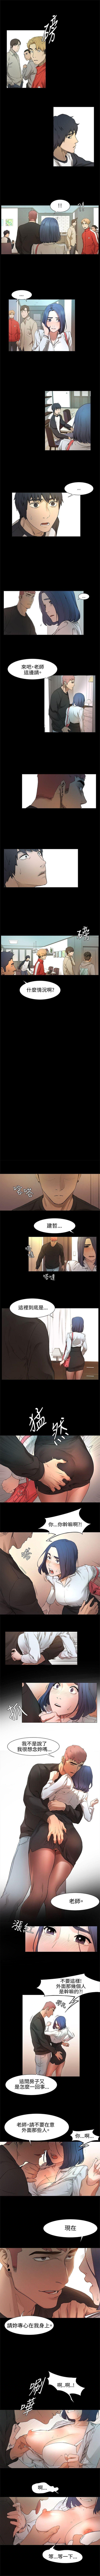 Flexible 衝突 1-99 官方中文（連載中） Latino - Page 11